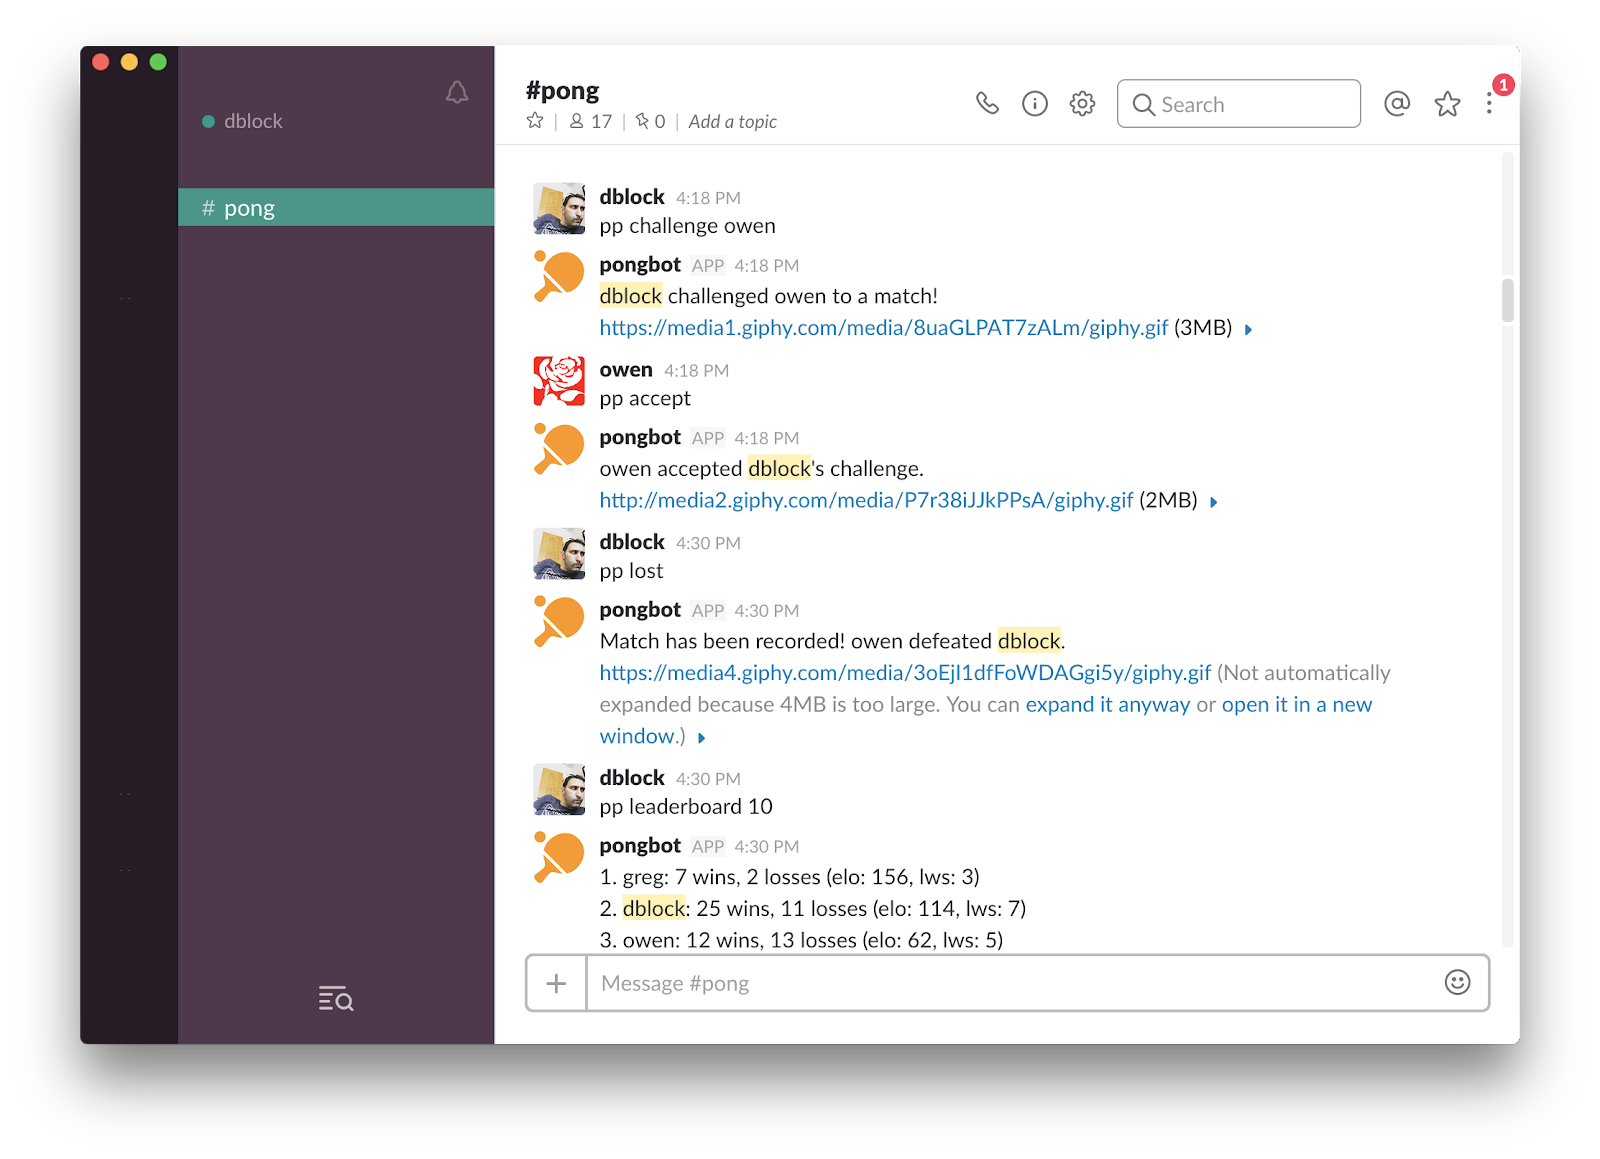 on-developing-and-marketing-slack-bots-while-working-at-amazon